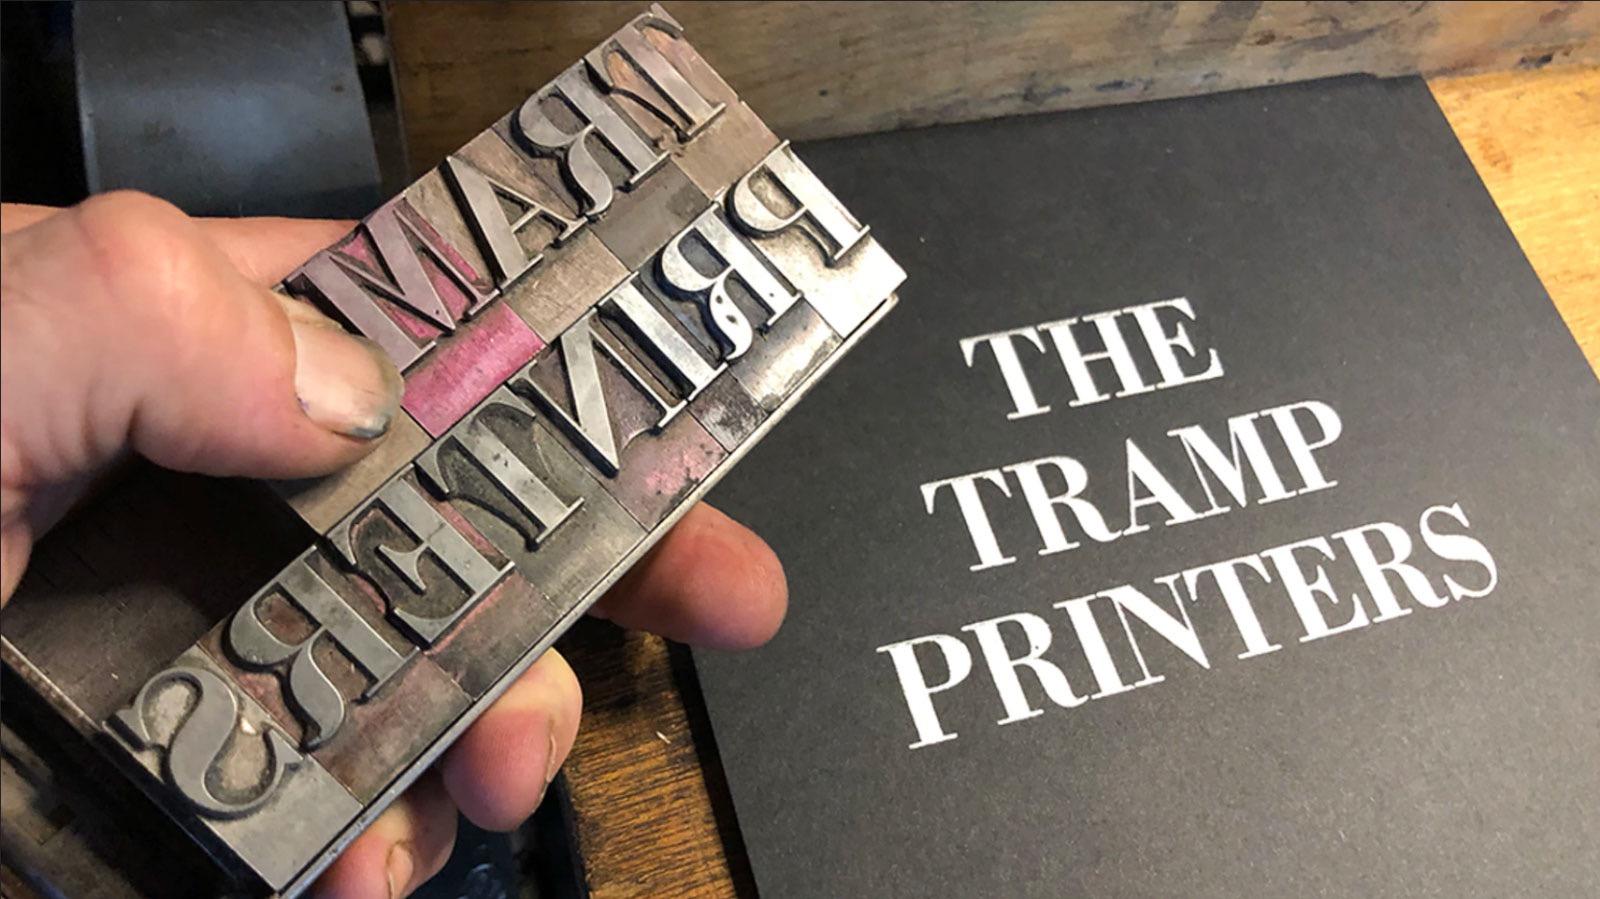 More information about "On Kickstarter: The Tramp Printers"